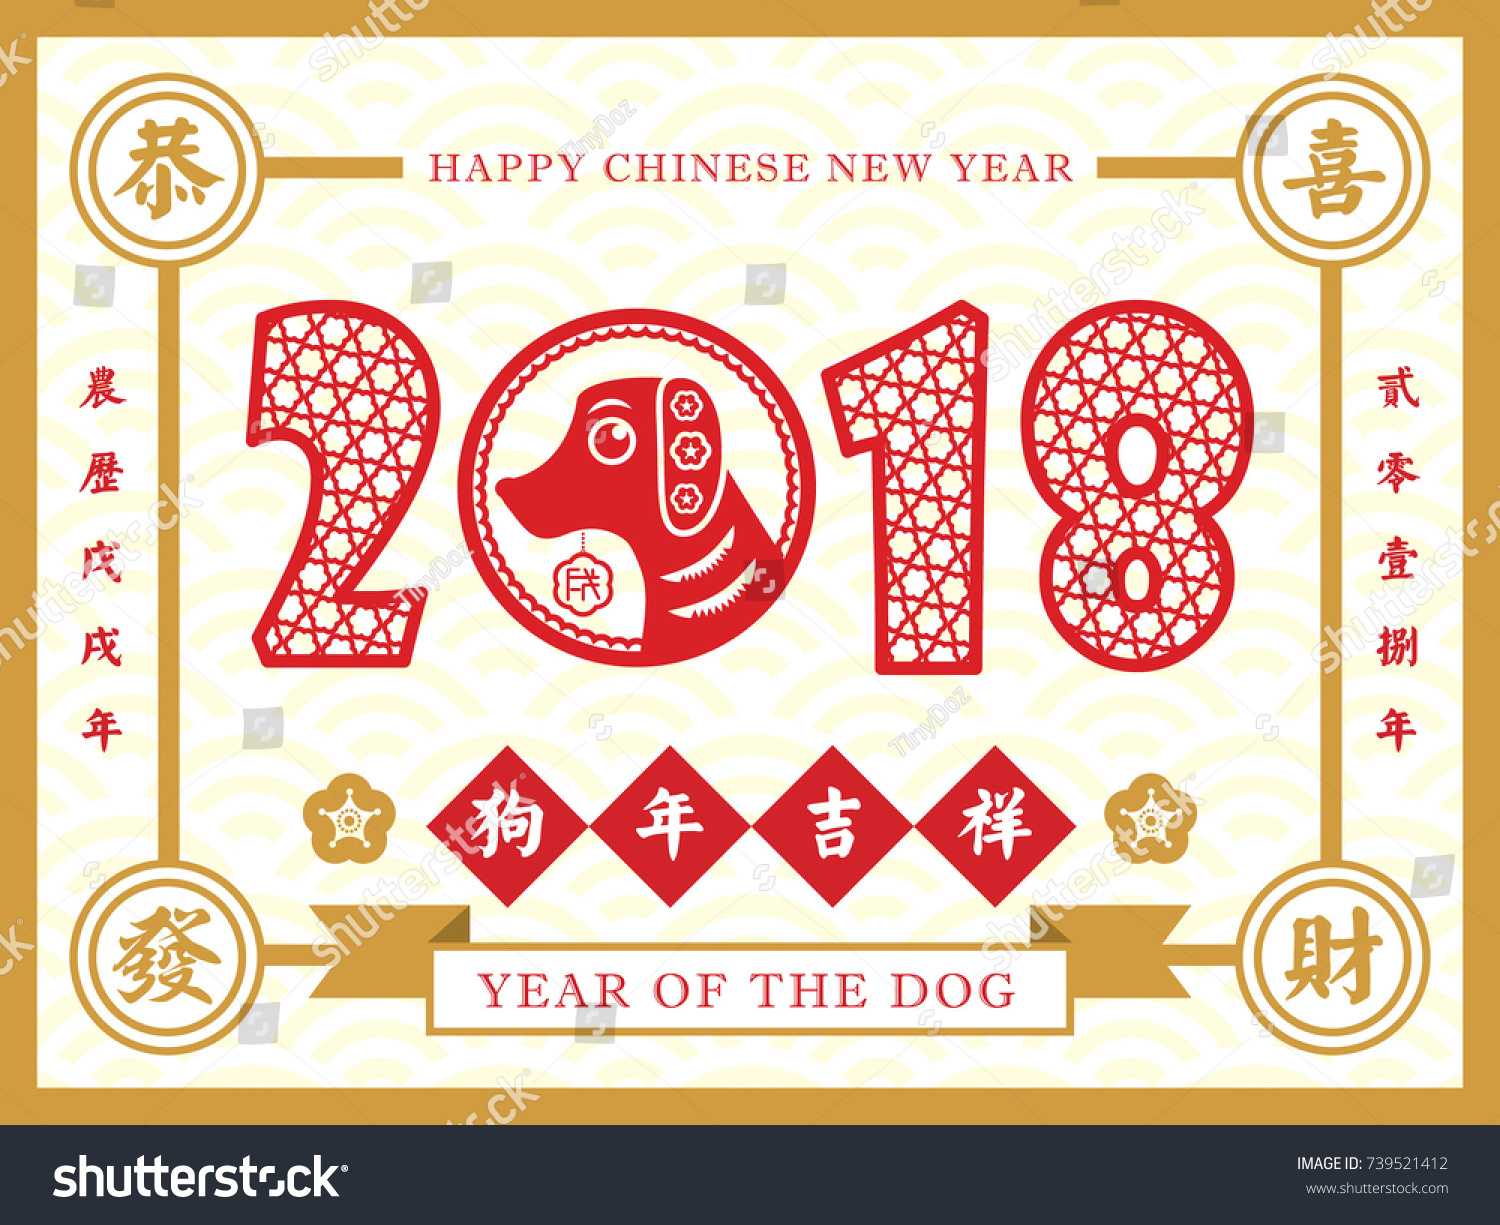 2018 Chinese New Year Greeting Card Stock Vector (Royalty With Regard To Good Luck Card Templates